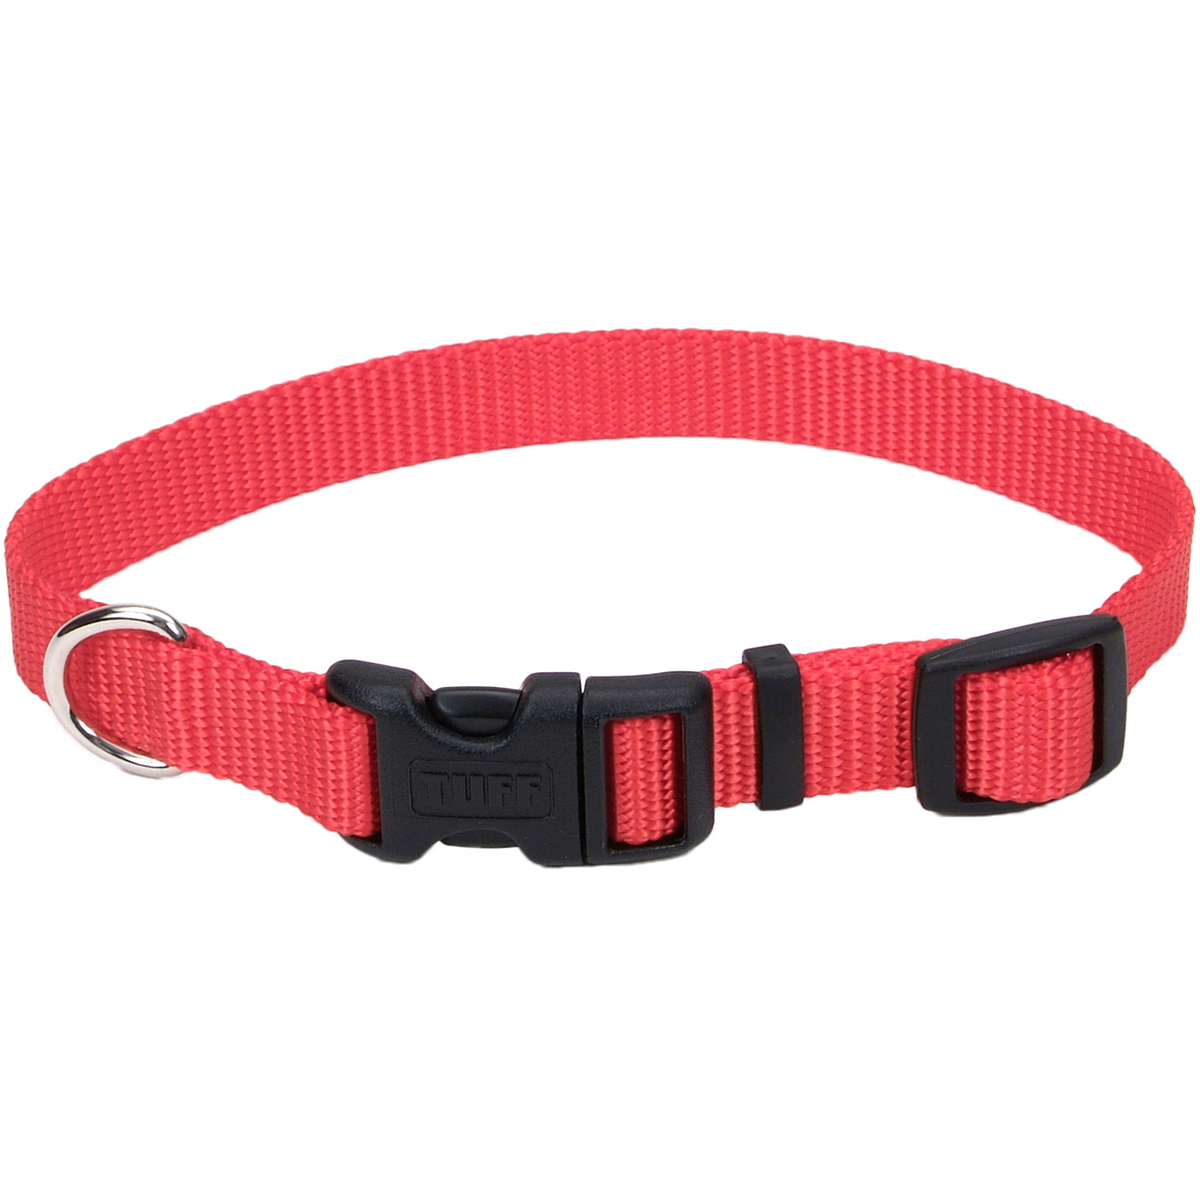 0.75 X 14 - 20 In. Adjustable Nylon Dog Collar With Tuff Buckle, Red